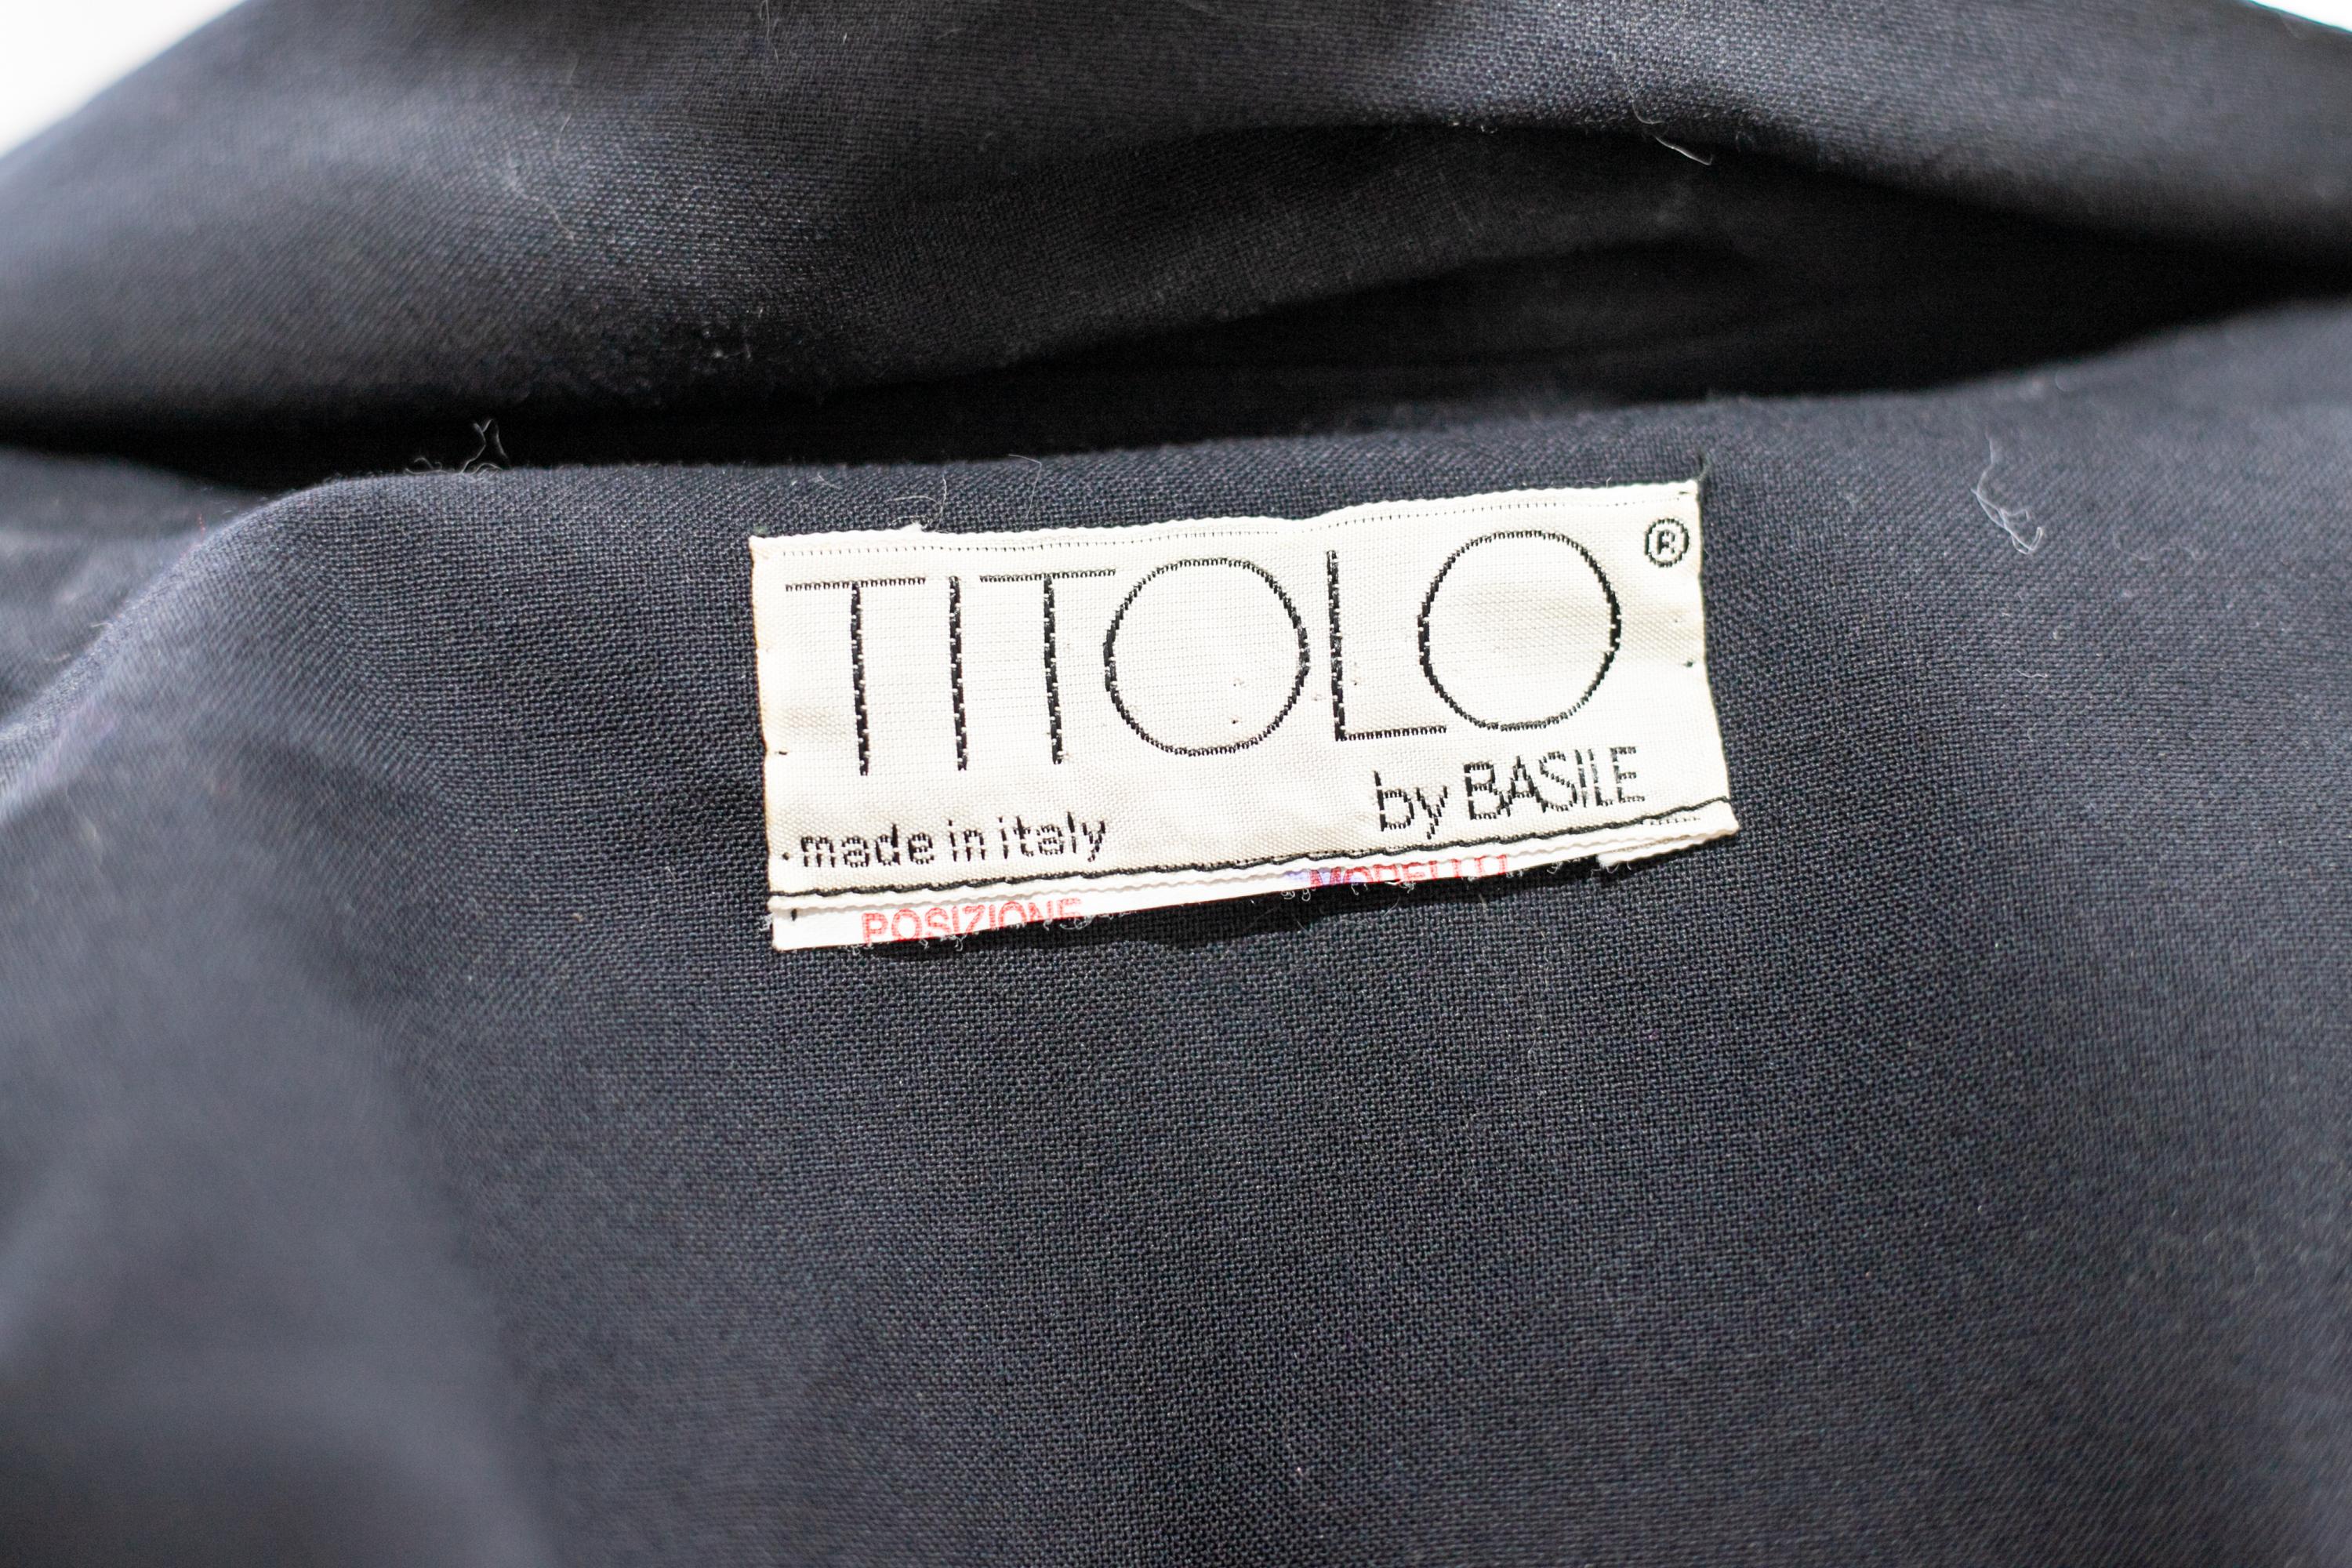 Lovely vintage trench coat designed by Titolo for Basile in the 1990s, made in Italy.
ORIGINAL LABEL.
The blazer is totally made of black cotton with long but soft sleeves.
The collar has a classic standard stand-up cut, which gives an unparalleled